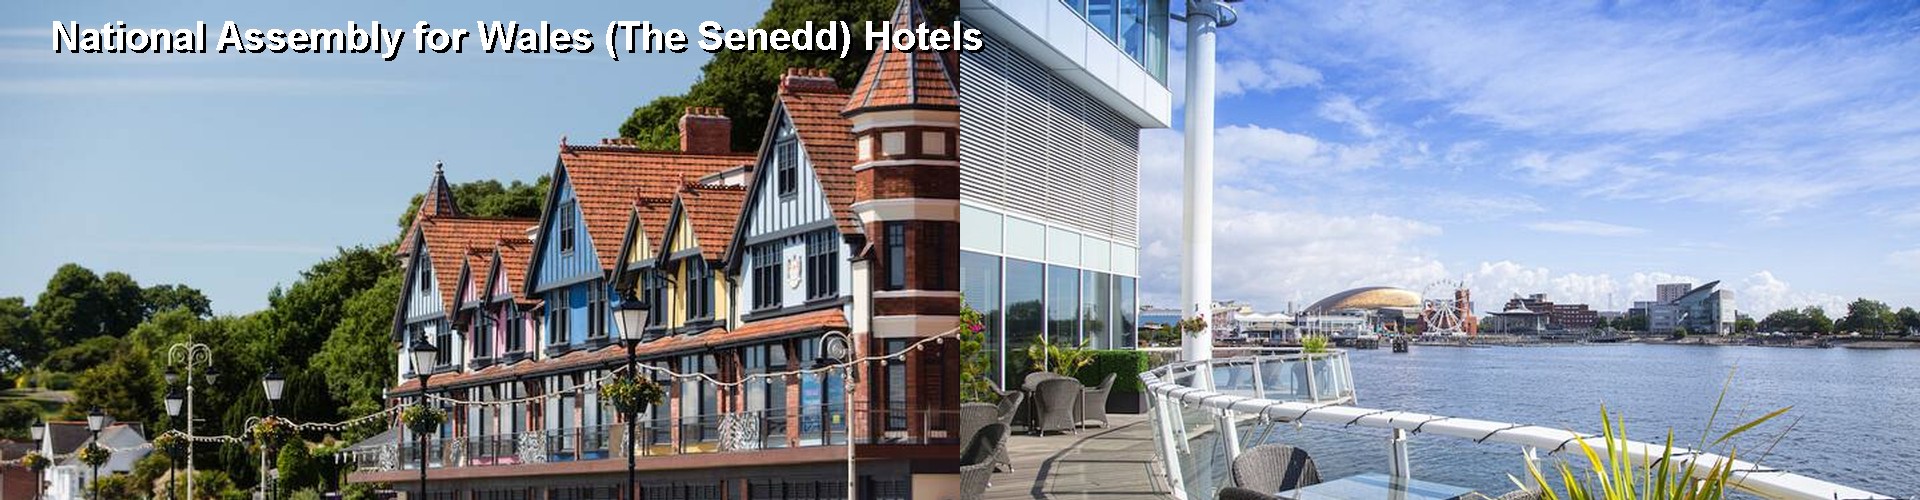 5 Best Hotels near National Assembly for Wales (The Senedd)